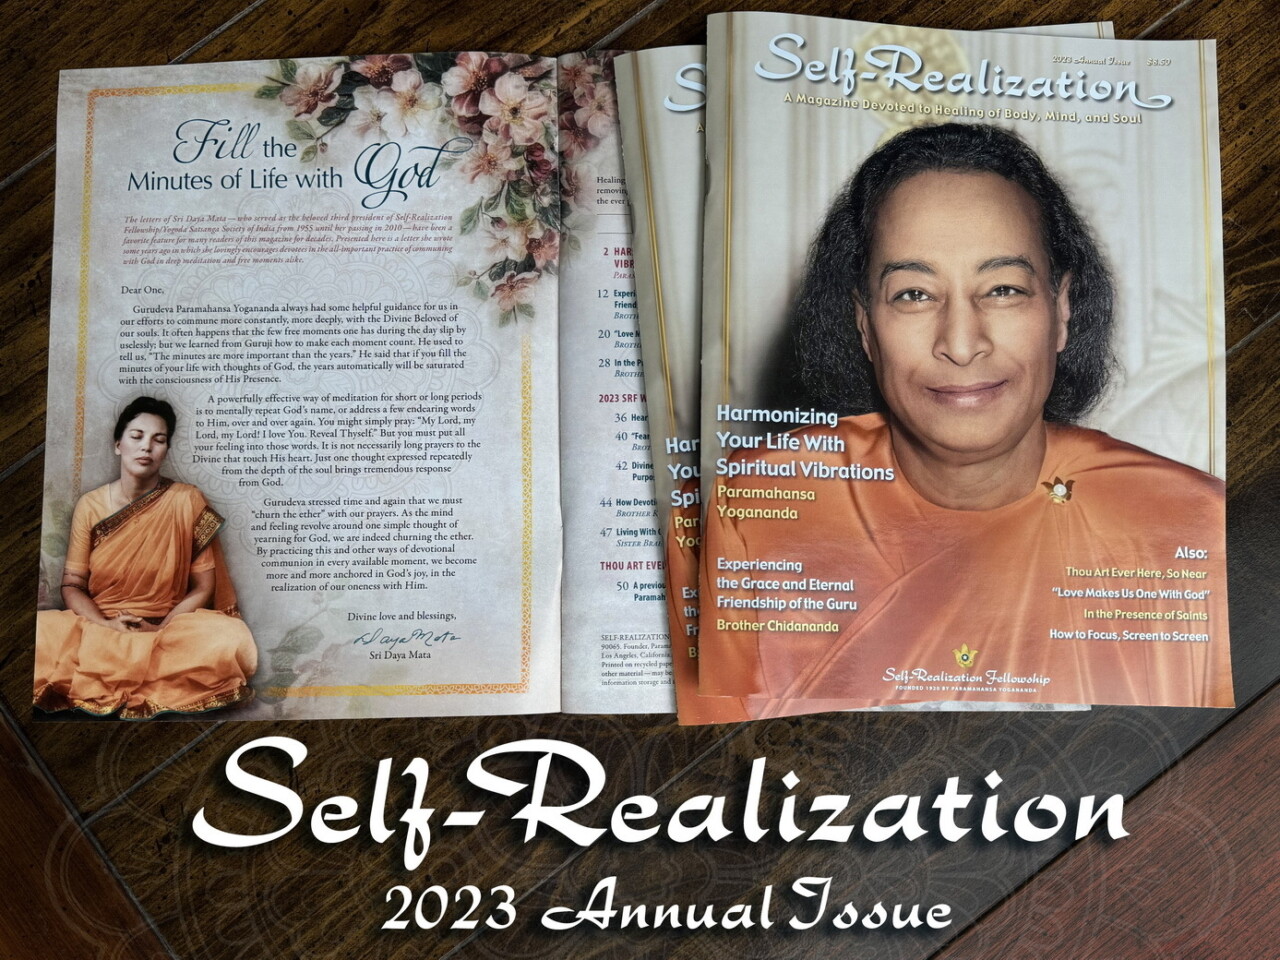 2023 Annual Issue of Self Realization magazine Blog